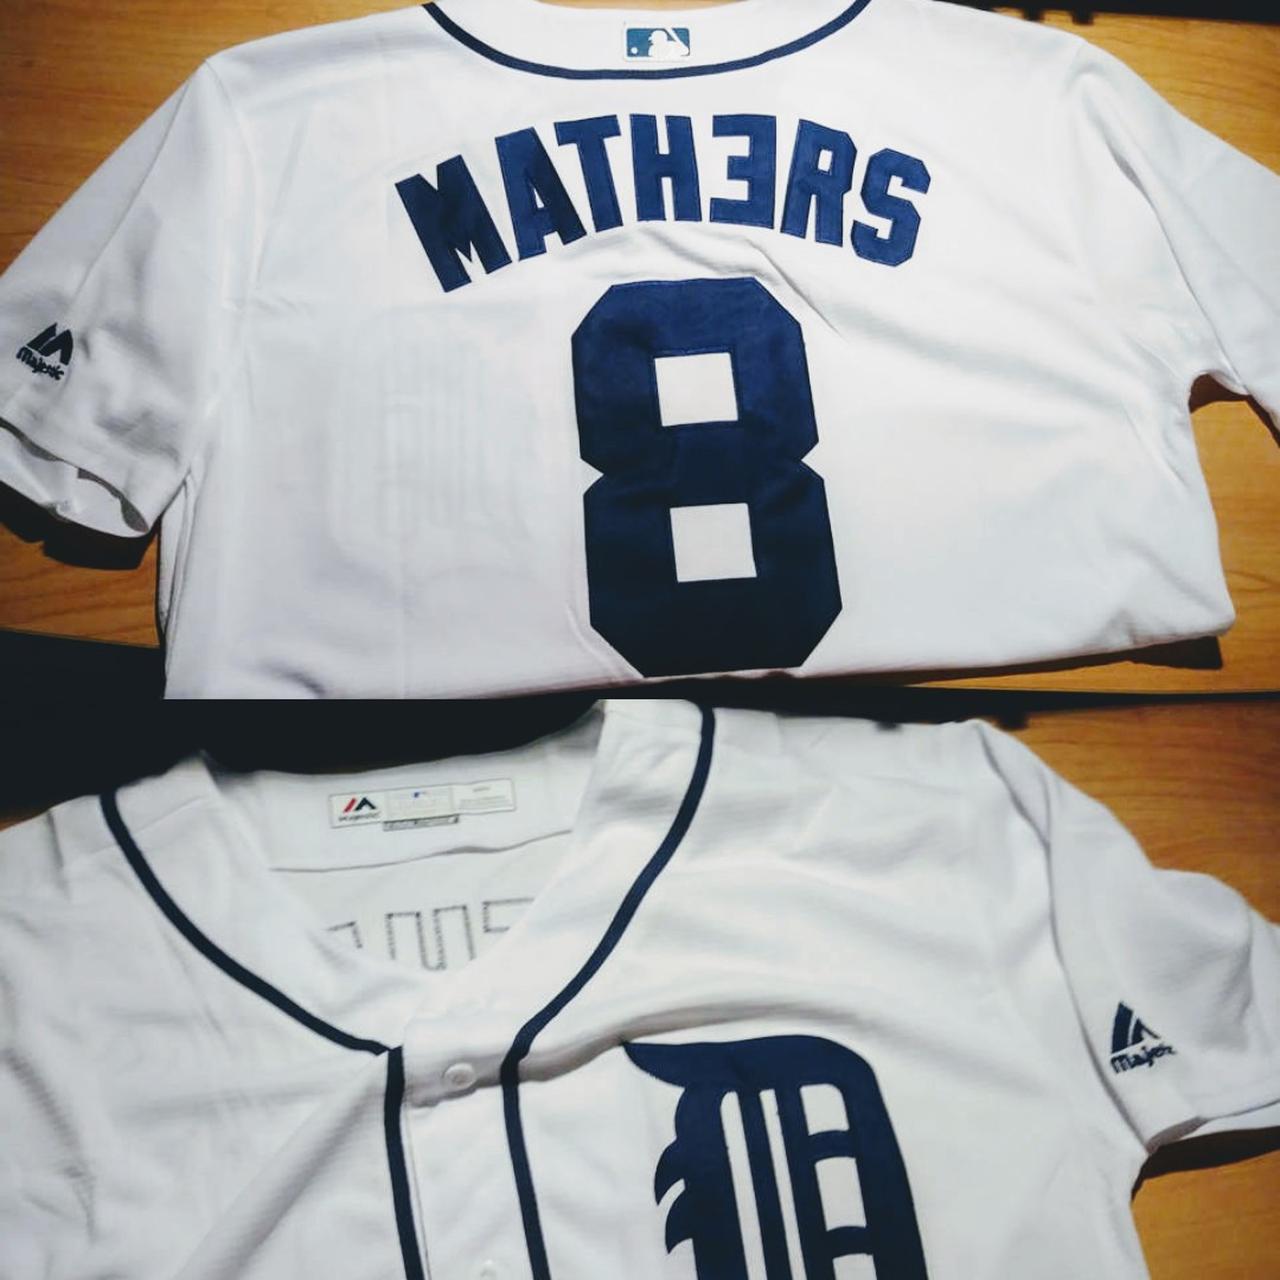 You can buy Eminem-themed Tigers jerseys this season